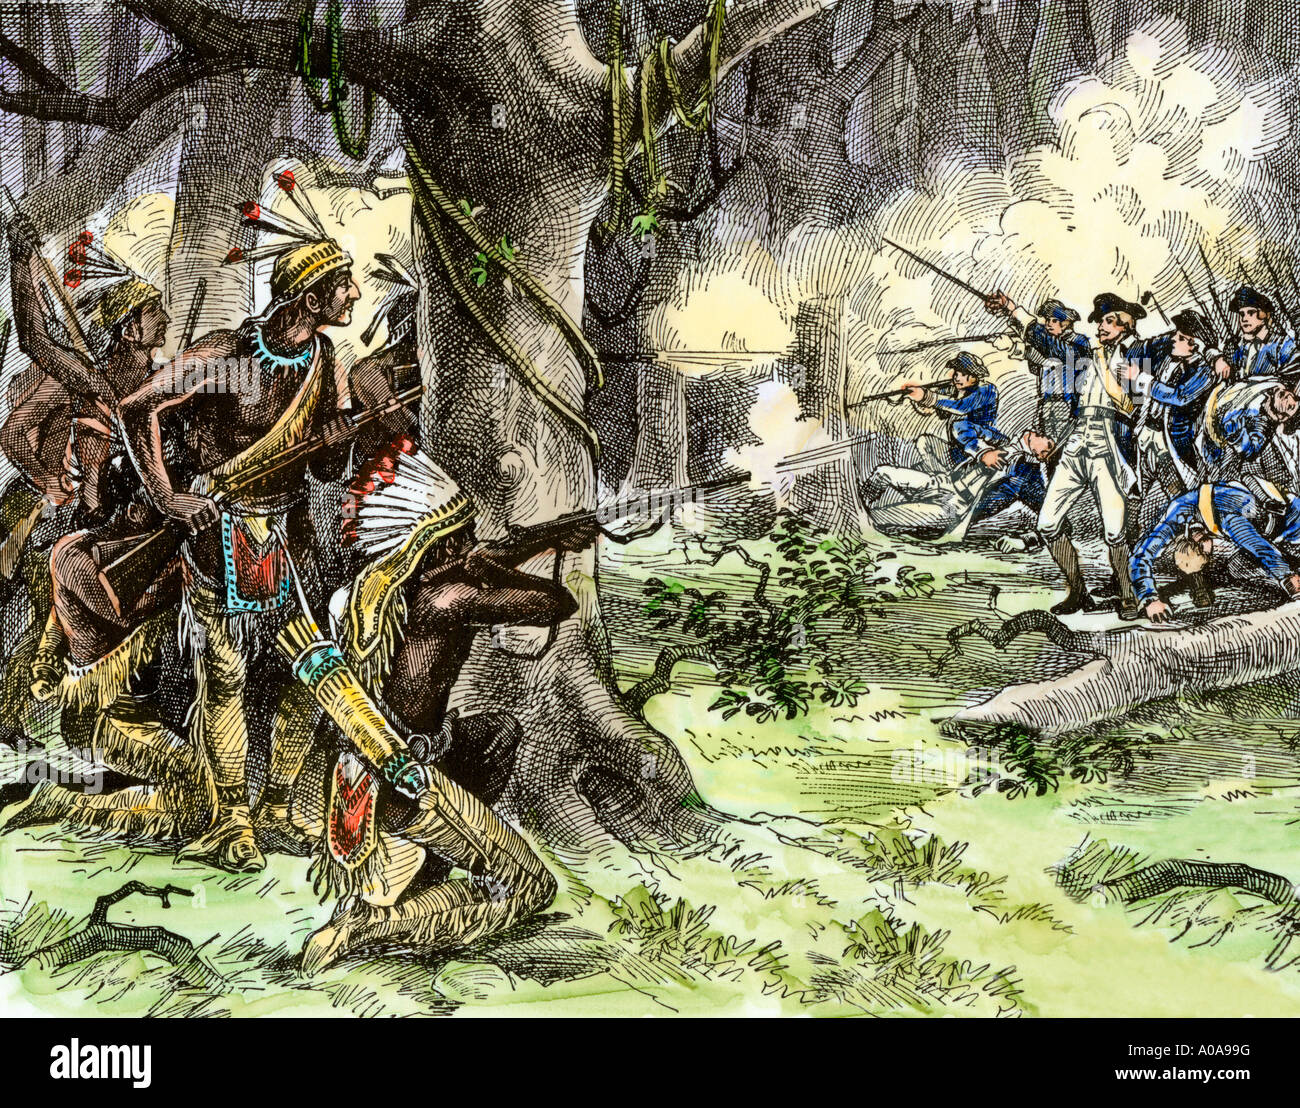 General Josiah Harmar defeated by Miami tribe warriors in the Old Northwest Territory 1790. Hand-colored woodcut Stock Photo